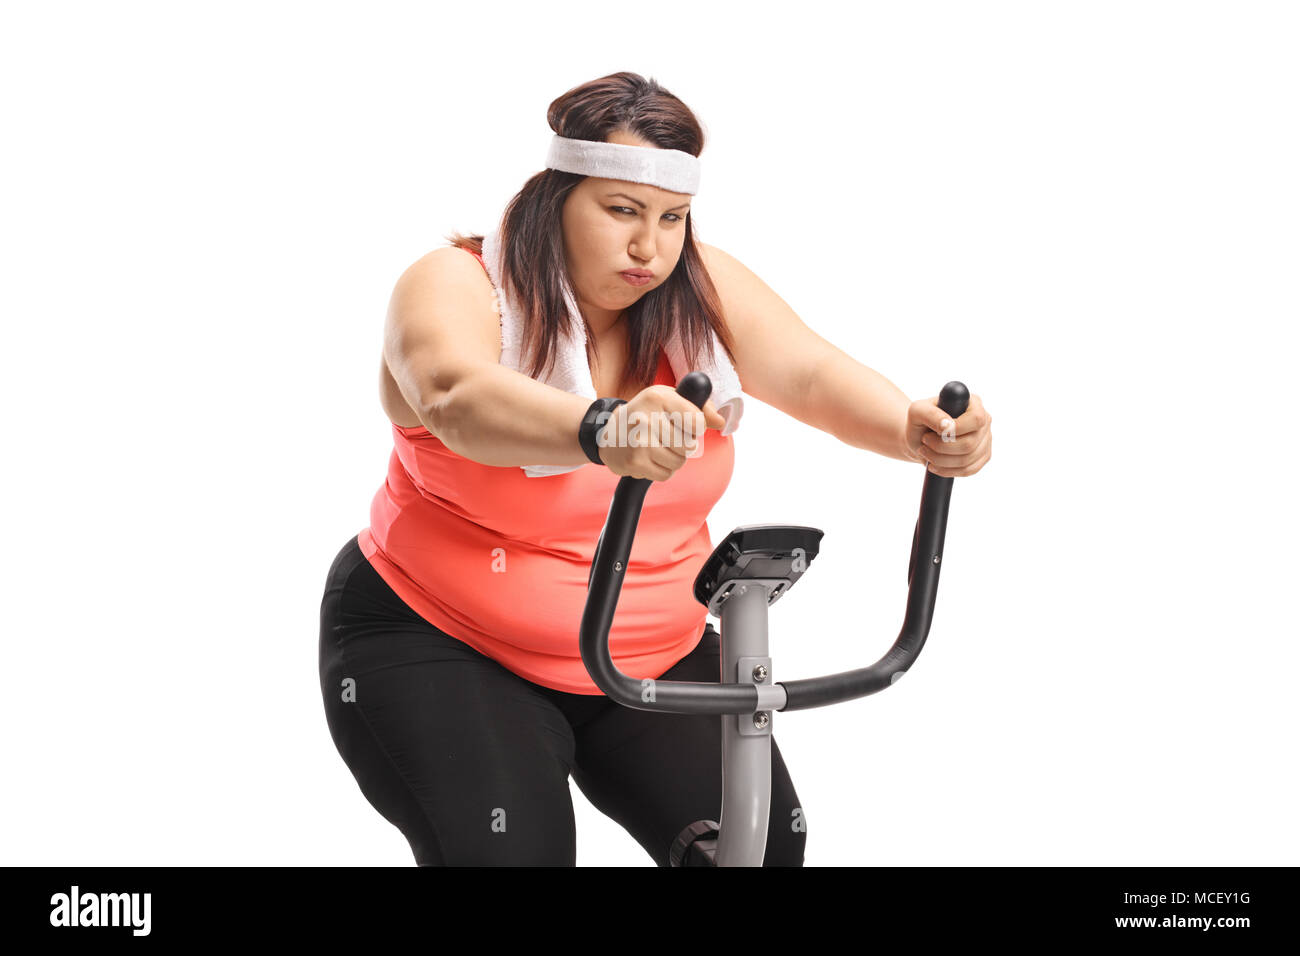 Exhausted overweight woman exercising on a stationary bike isolated on white background Stock Photo